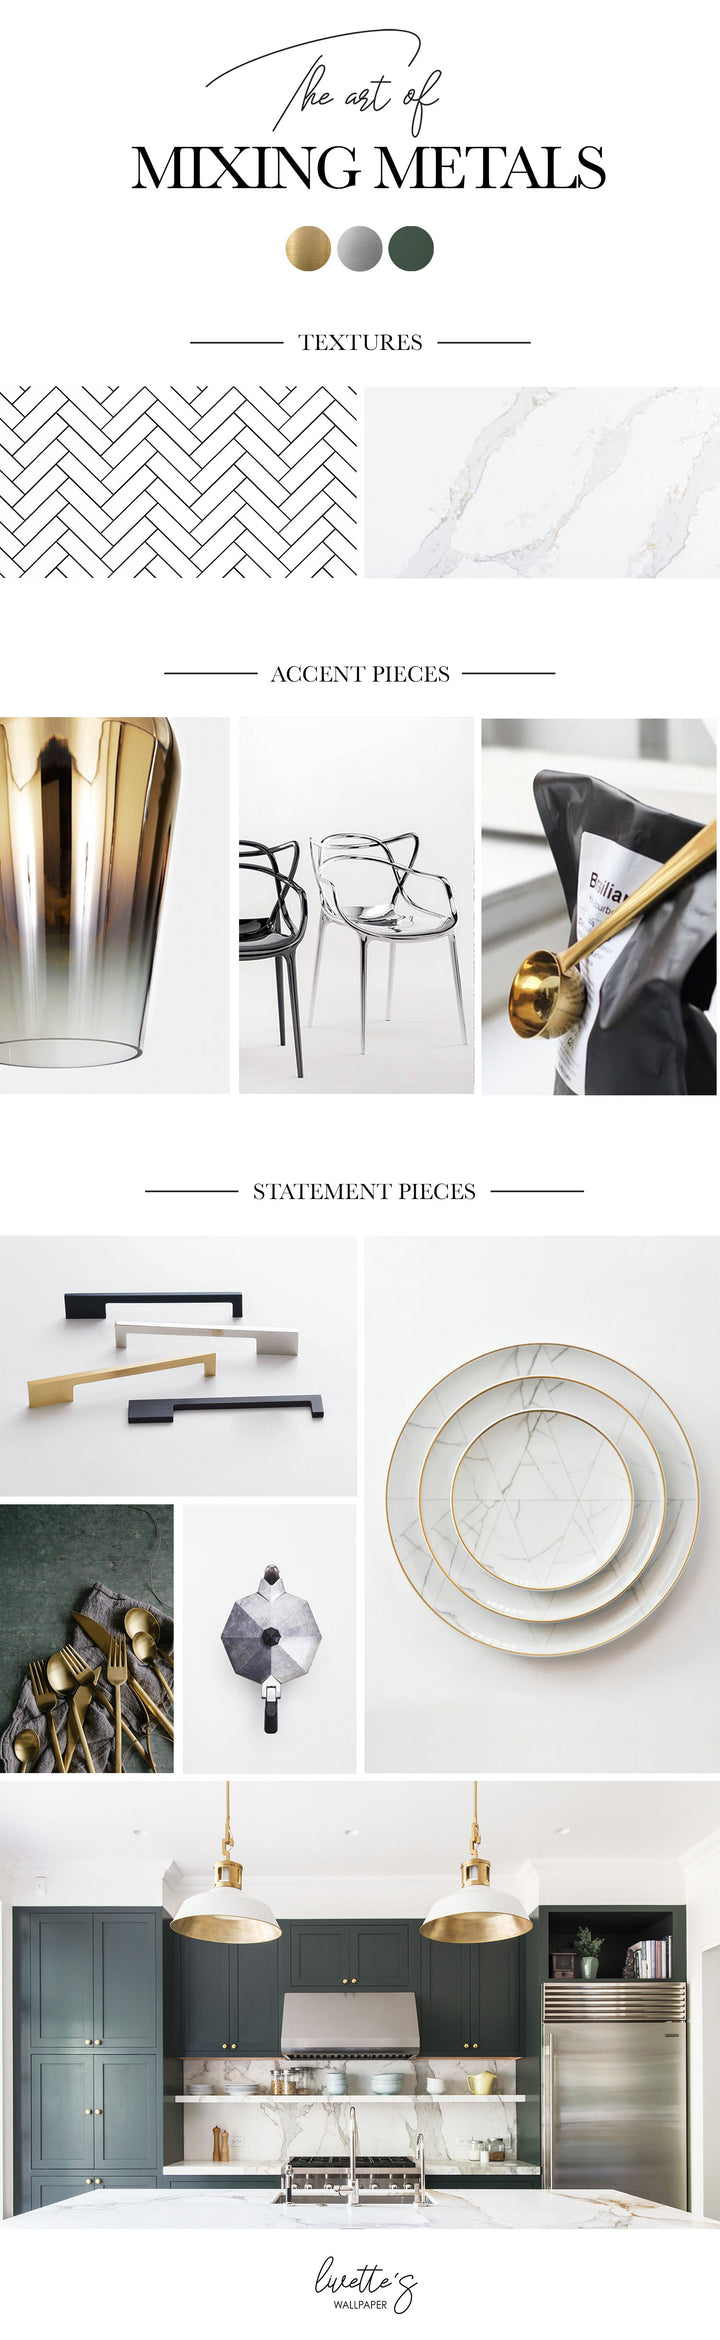 Mixed metals inspiration mood board for home interior